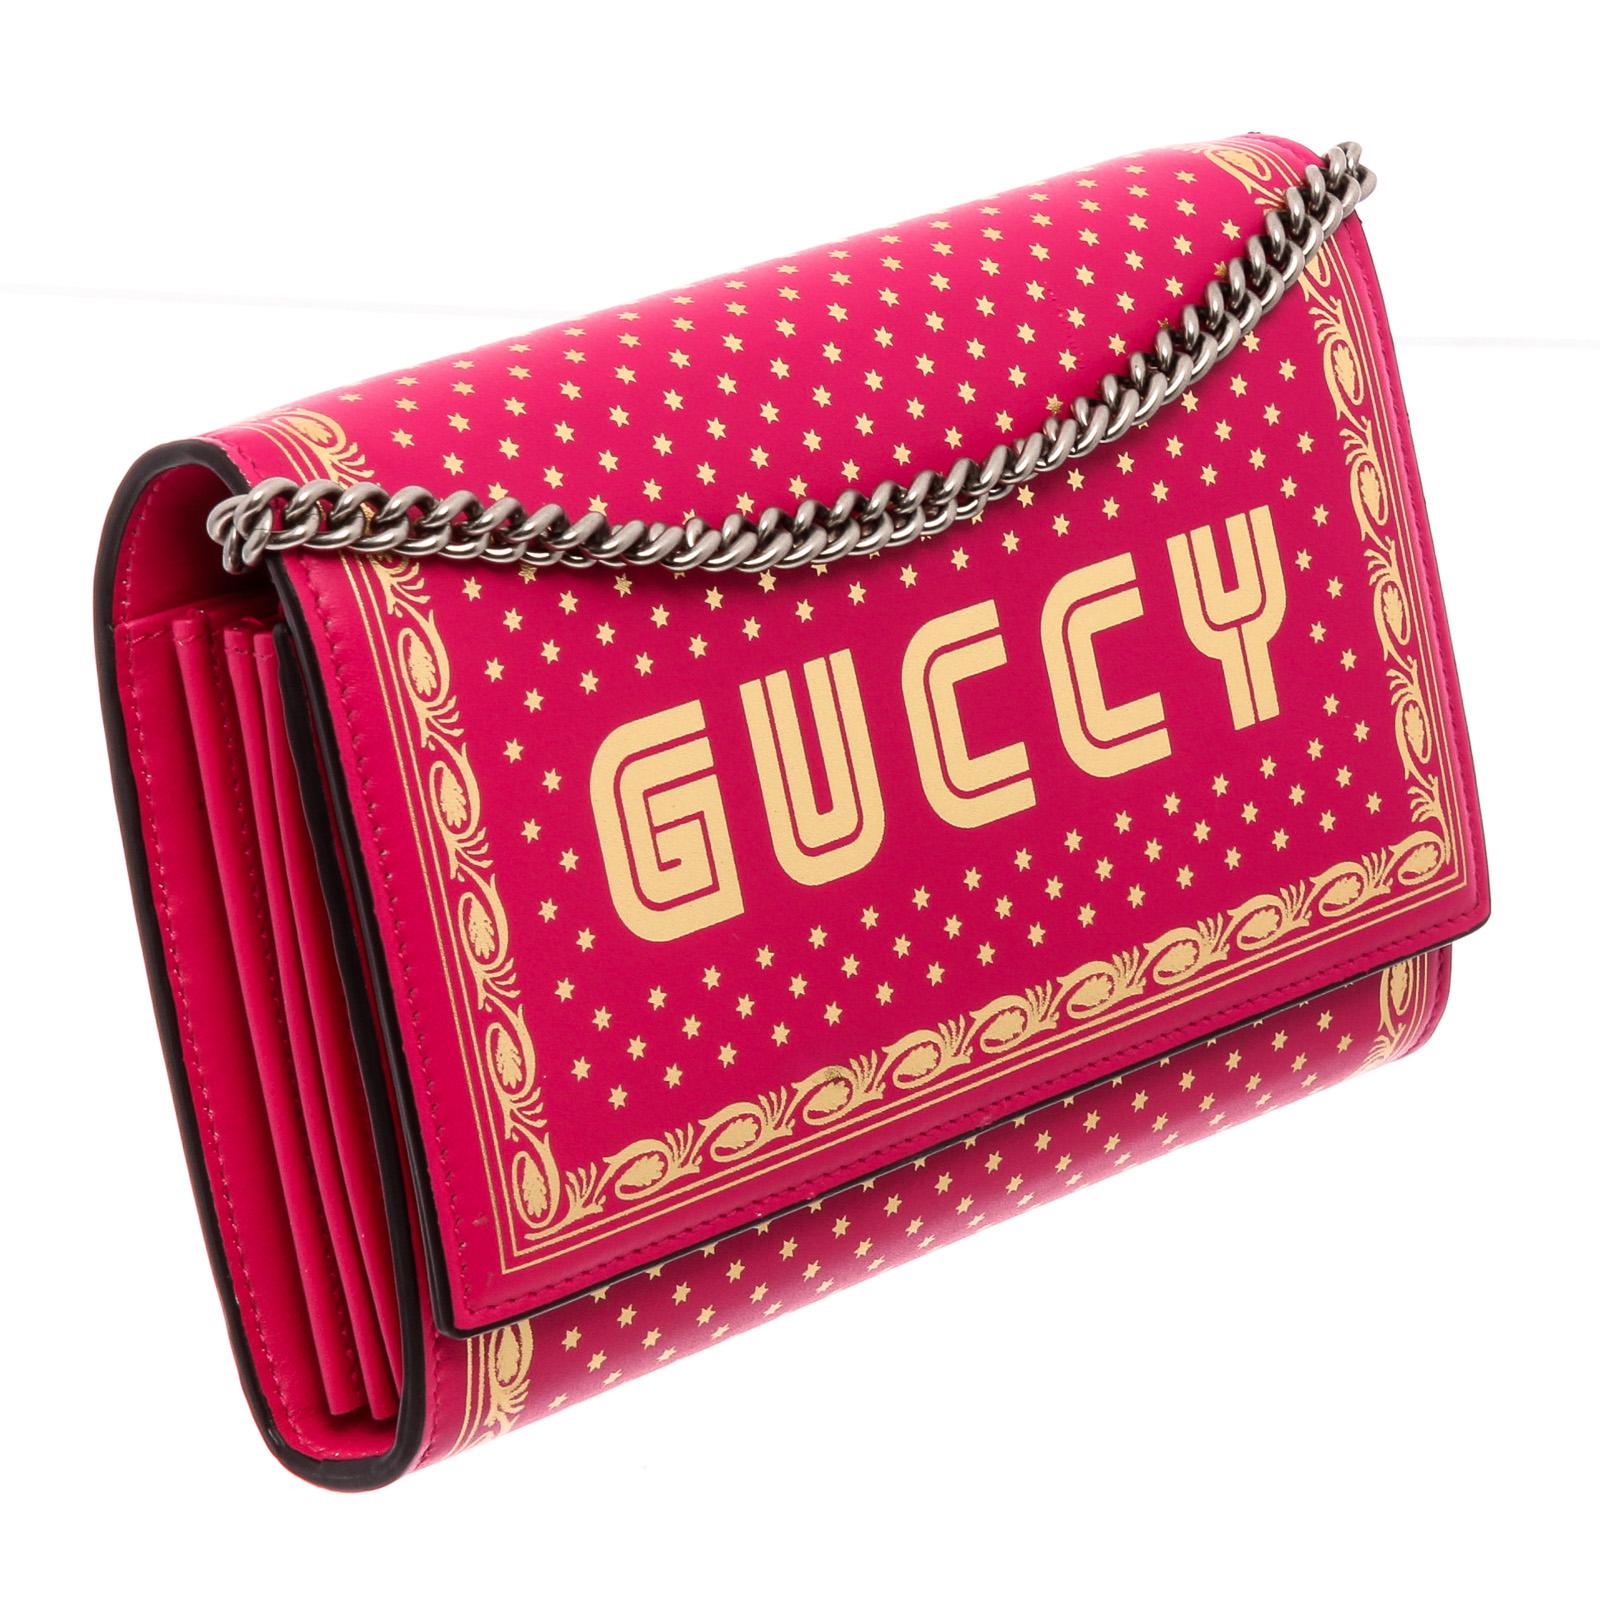 Gucci Chain Wallet shoulder bag is crafted of bright pink calfskin leather with gold detailing and 